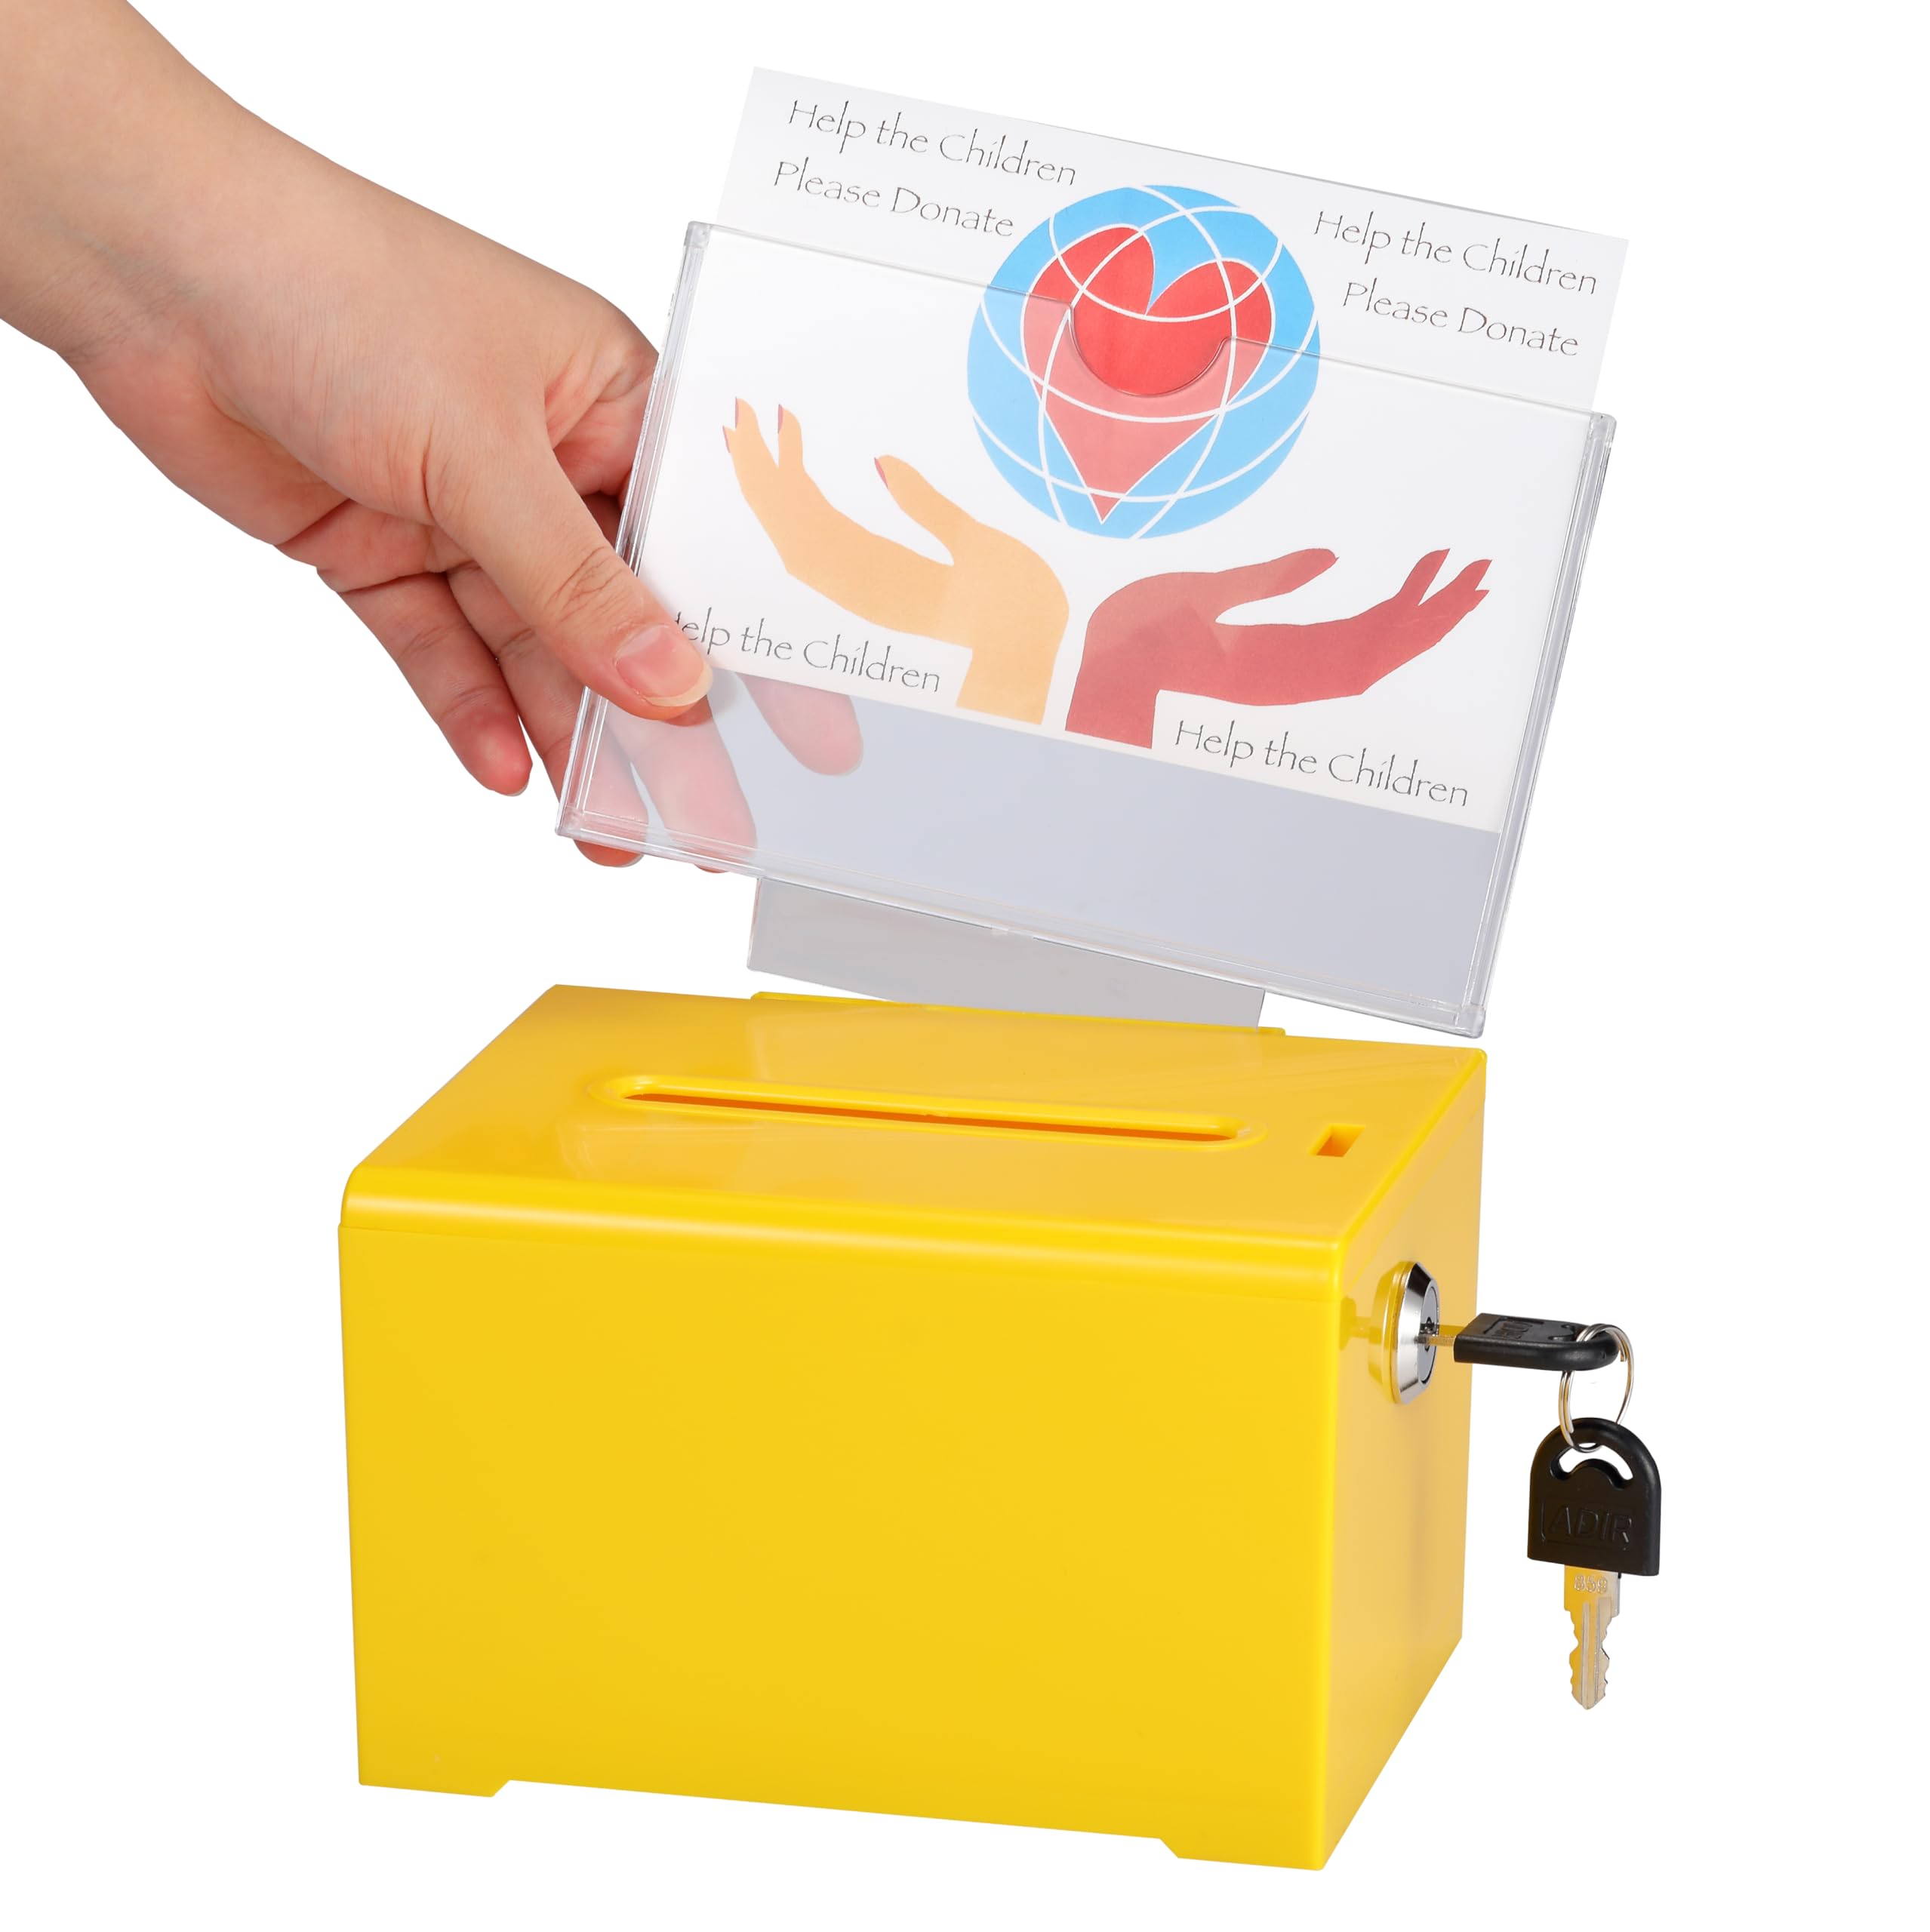 Adir Acrylic Donation Ballot Box with Lock - Secure and Safe Clear Slotted Suggestion Box - Storage Lock Deposit Box with Keys for Cards, Votes, Tickets, Feedback and Money (6.25" x 4.5" x 4")  - Like New